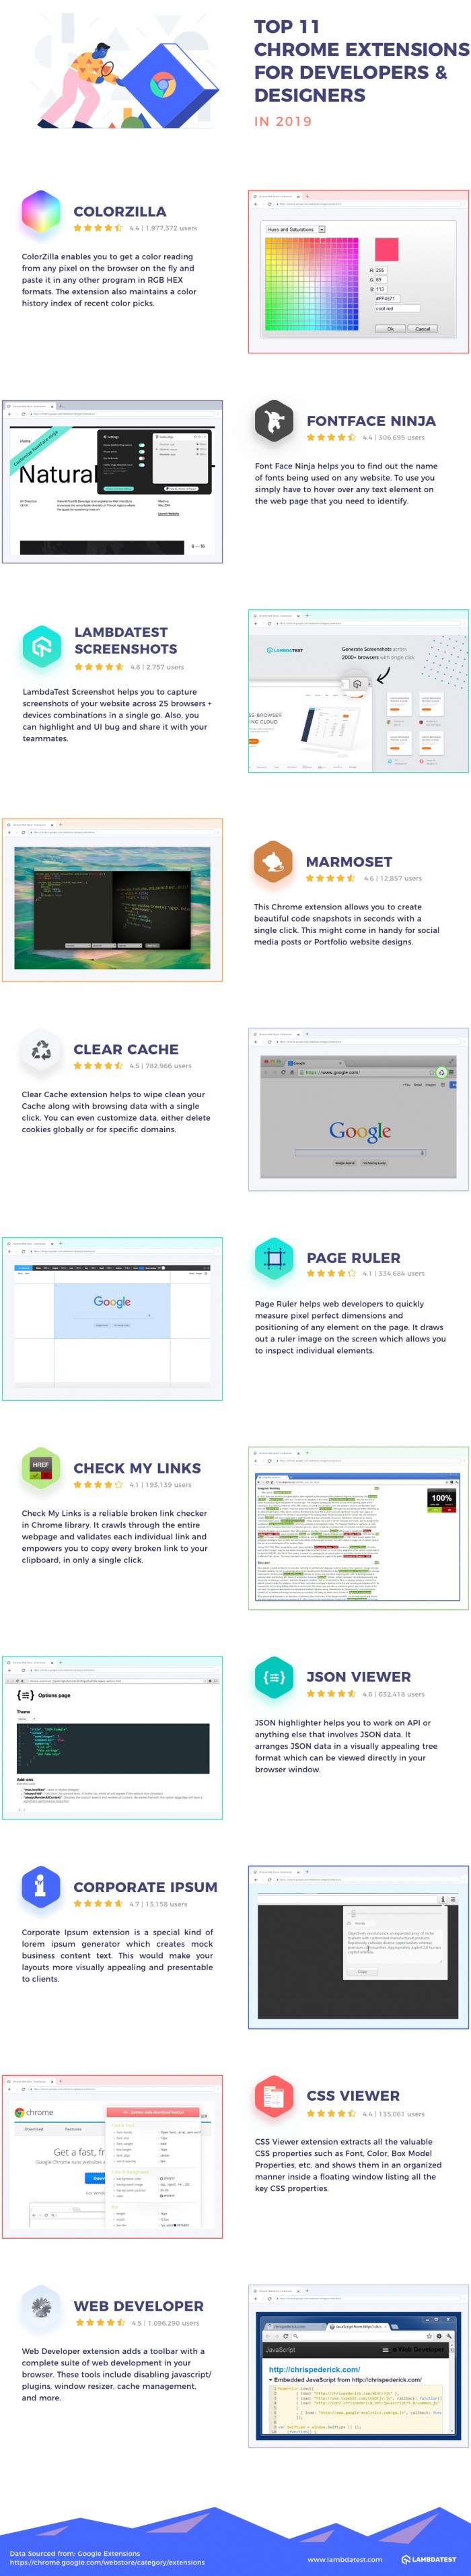 Infographic: Top 11 Chrome Extensions For Developers And Designers In 2019